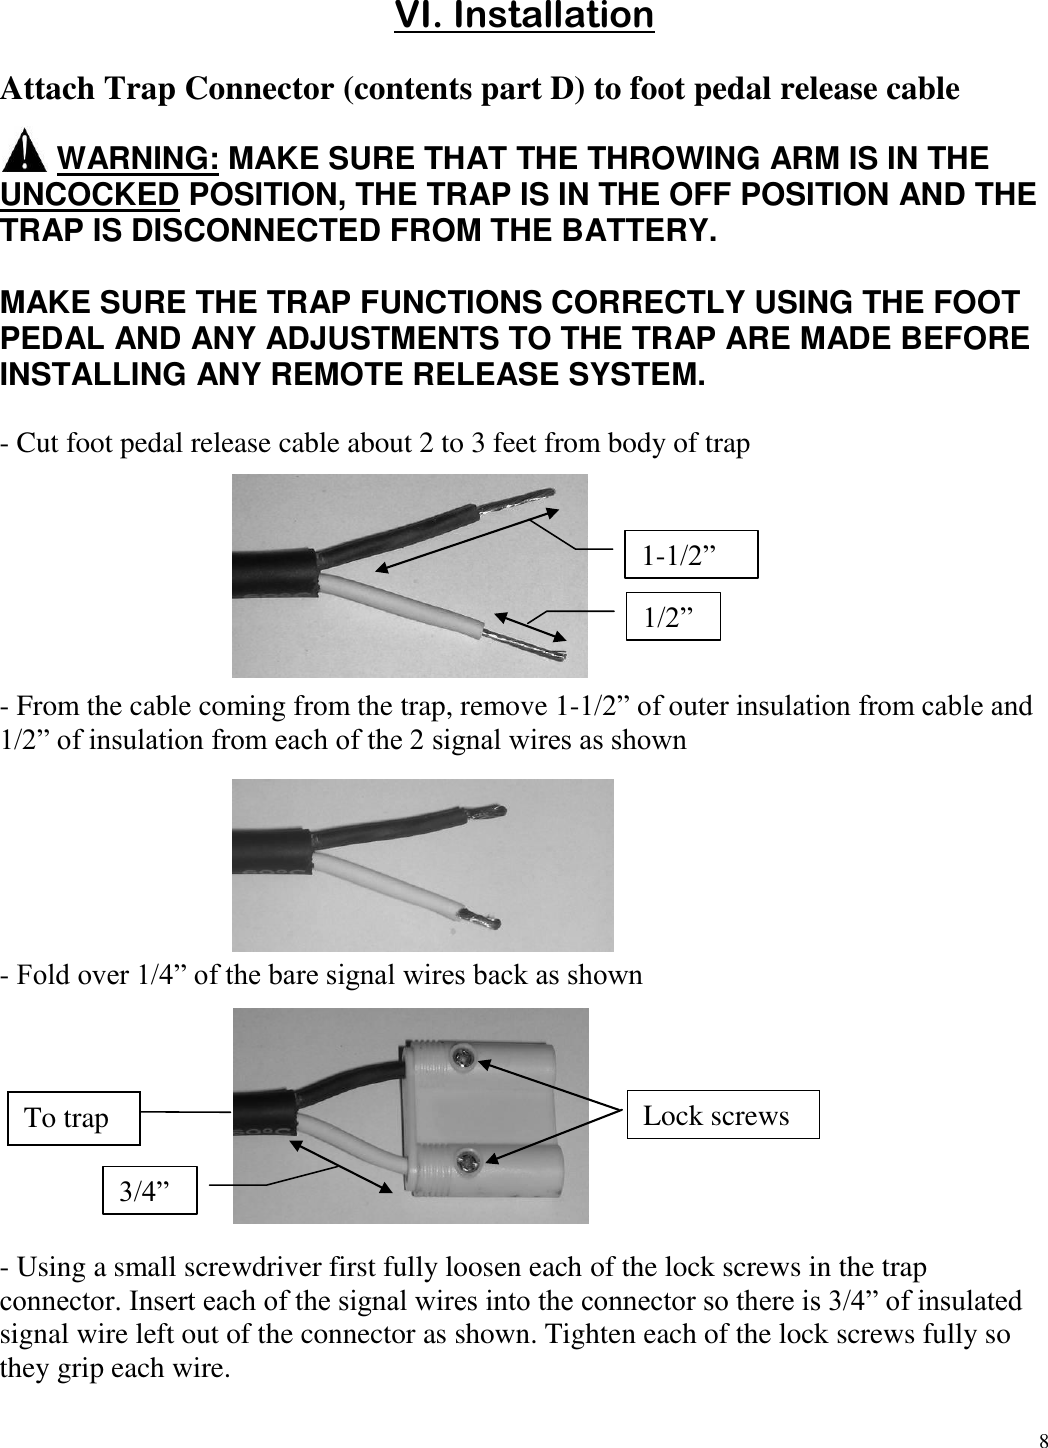 8   VI. Installation  Attach Trap Connector (contents part D) to foot pedal release cable         WARNING: MAKE SURE THAT THE THROWING ARM IS IN THE UNCOCKED POSITION, THE TRAP IS IN THE OFF POSITION AND THE TRAP IS DISCONNECTED FROM THE BATTERY.  MAKE SURE THE TRAP FUNCTIONS CORRECTLY USING THE FOOT PEDAL AND ANY ADJUSTMENTS TO THE TRAP ARE MADE BEFORE INSTALLING ANY REMOTE RELEASE SYSTEM.  - Cut foot pedal release cable about 2 to 3 feet from body of trap            - From the cable coming from the trap, remove 1-1/2” of outer insulation from cable and 1/2” of insulation from each of the 2 signal wires as shown        - Fold over 1/4” of the bare signal wires back as shown          - Using a small screwdriver first fully loosen each of the lock screws in the trap connector. Insert each of the signal wires into the connector so there is 3/4” of insulated signal wire left out of the connector as shown. Tighten each of the lock screws fully so they grip each wire.  1/2” 1-1/2” 3/4” Lock screws To trap Machine 